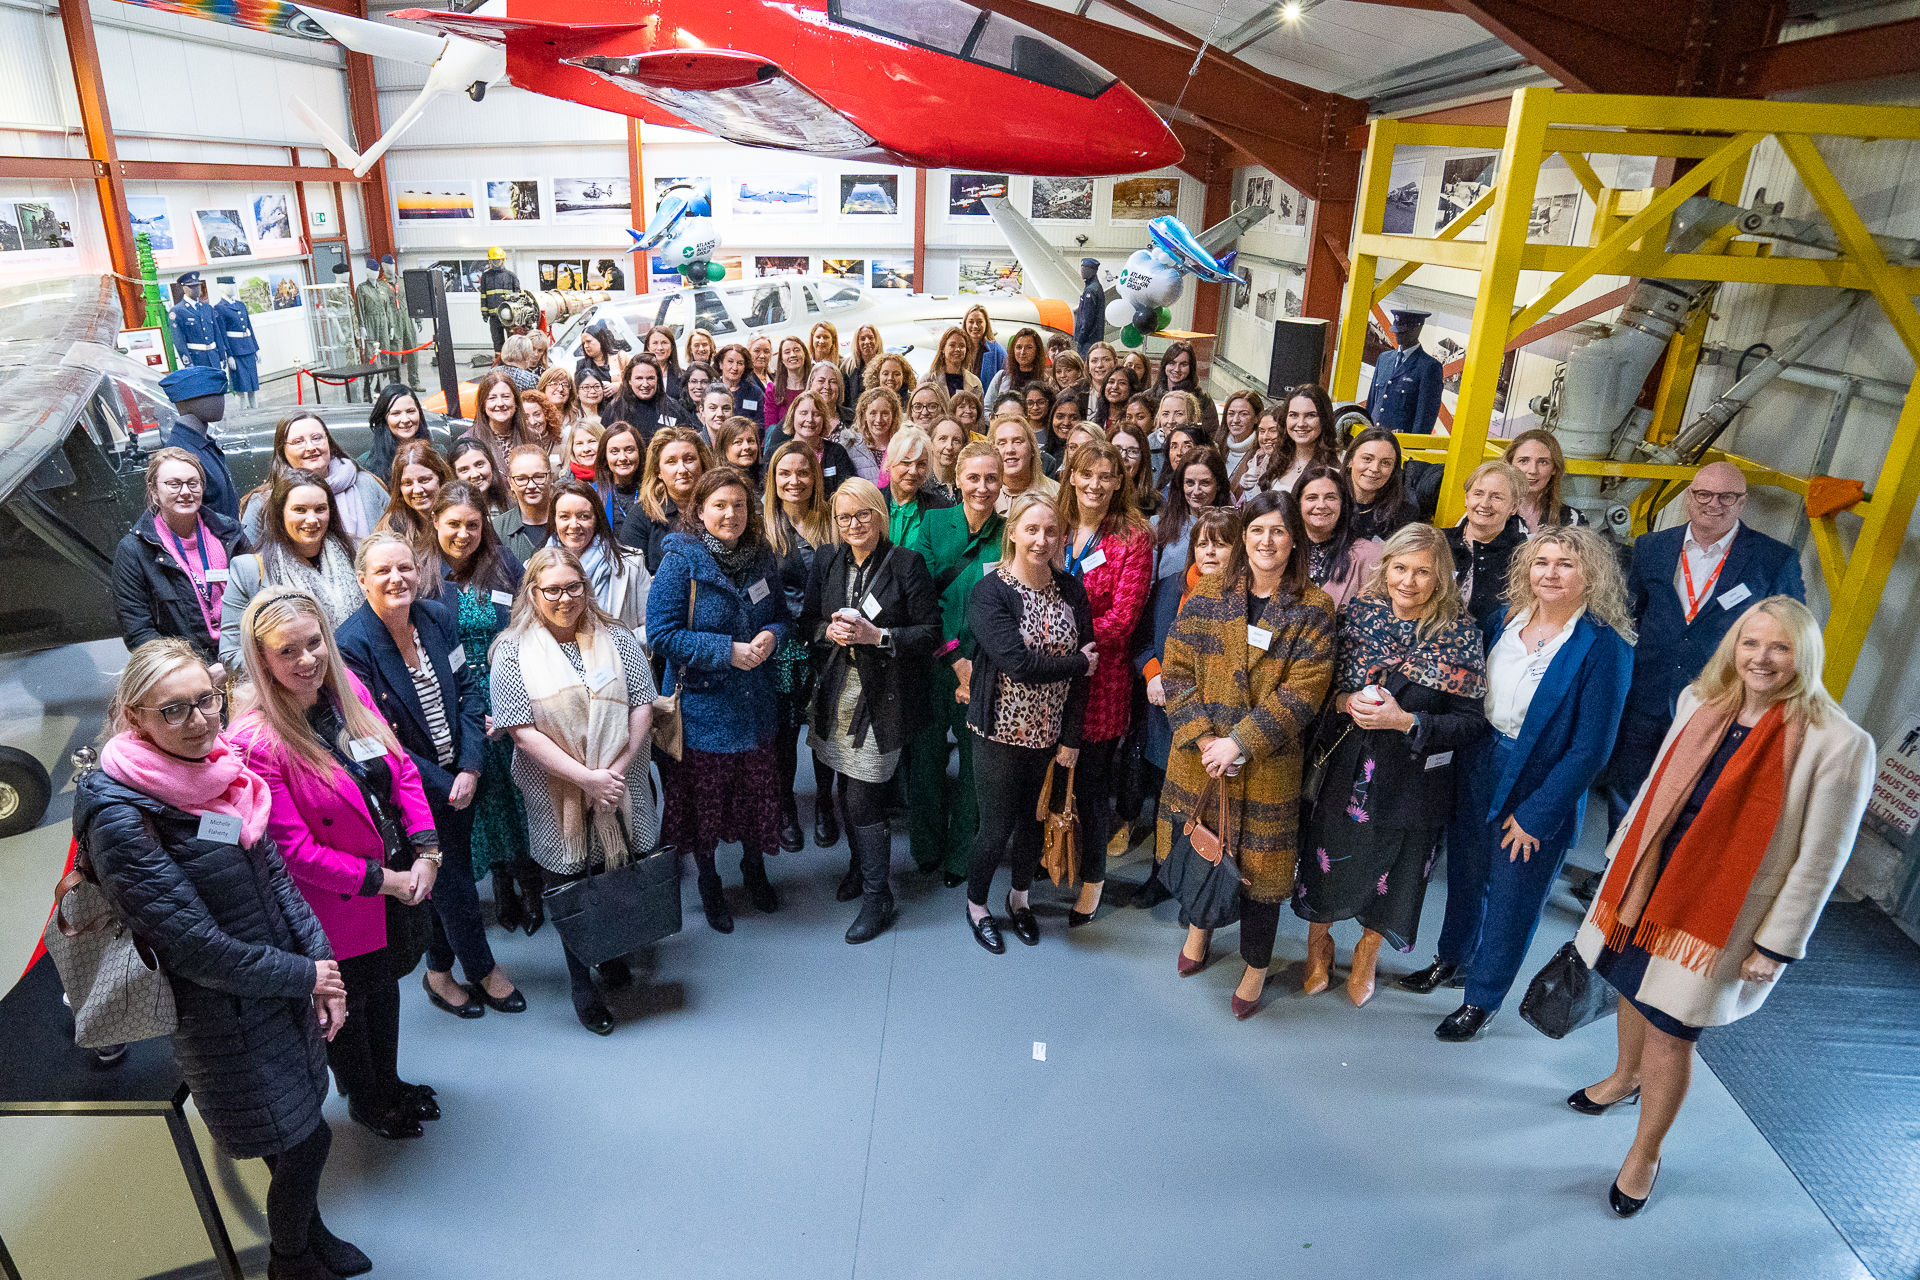 Pictured at the Shannon Aviation Museum are some of the attendees of the inaugural Women in Aviation Midwest networking event.